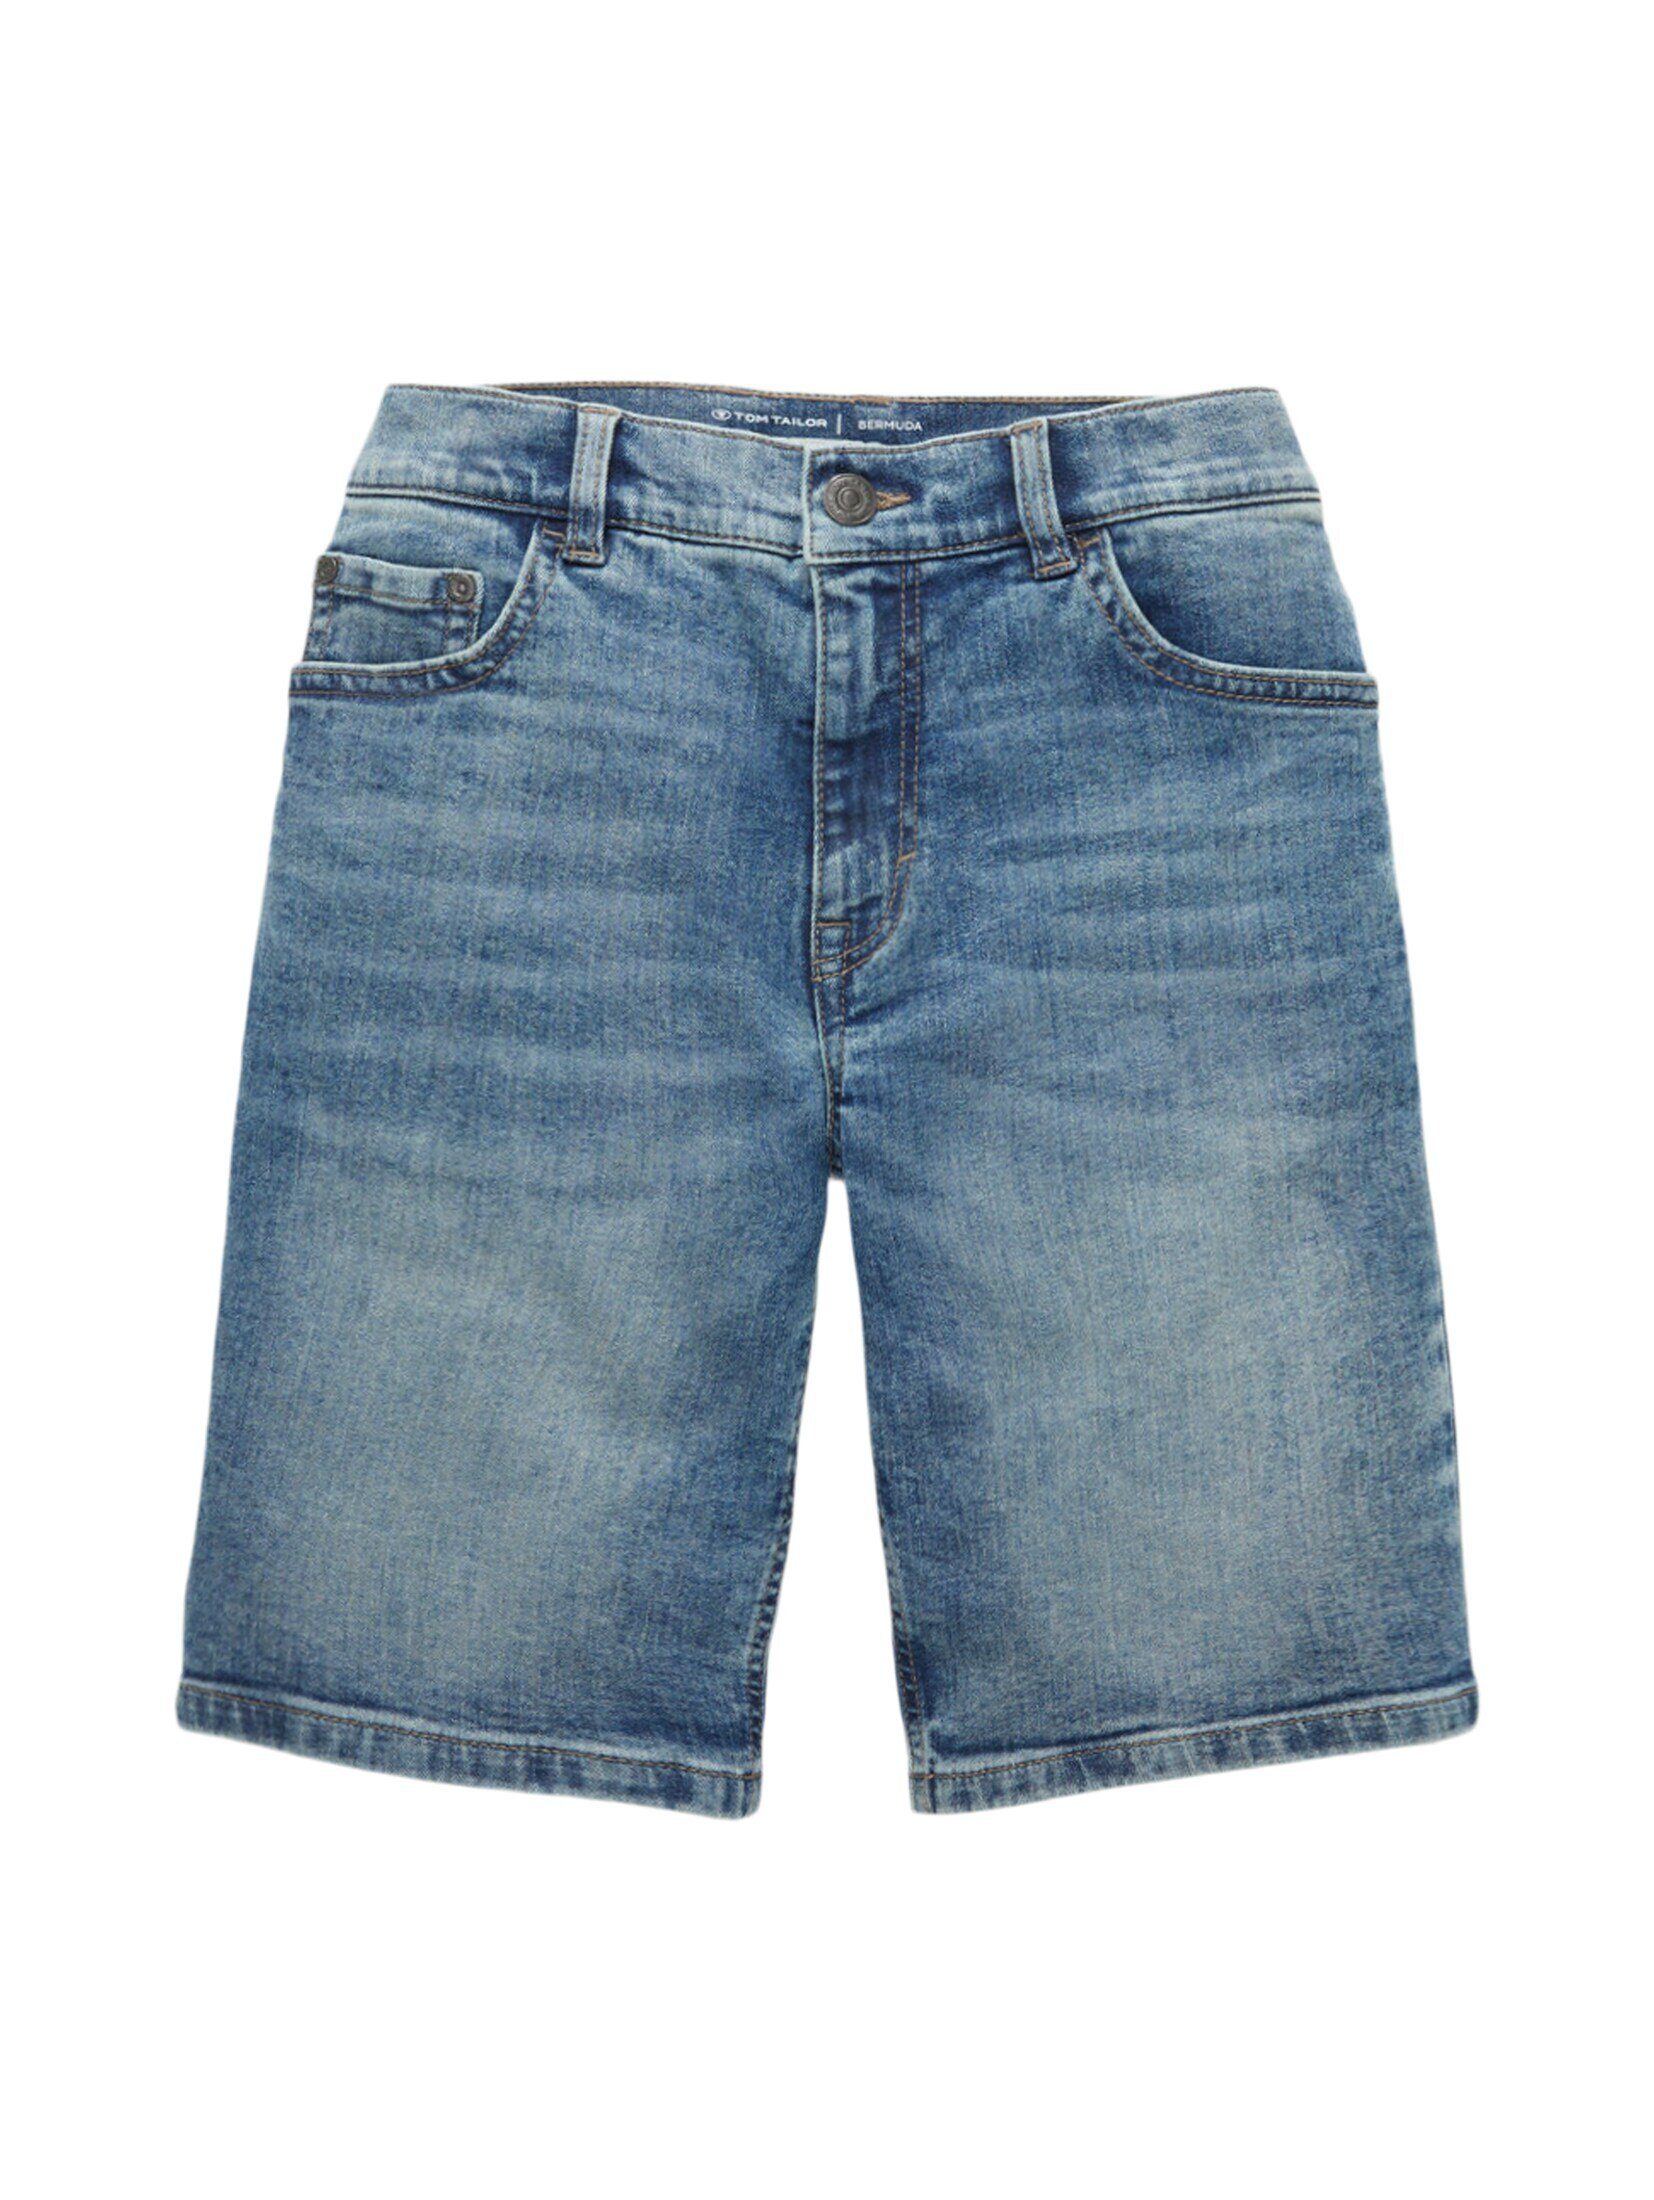 TOM TAILOR Jeansshorts Jeansshorts